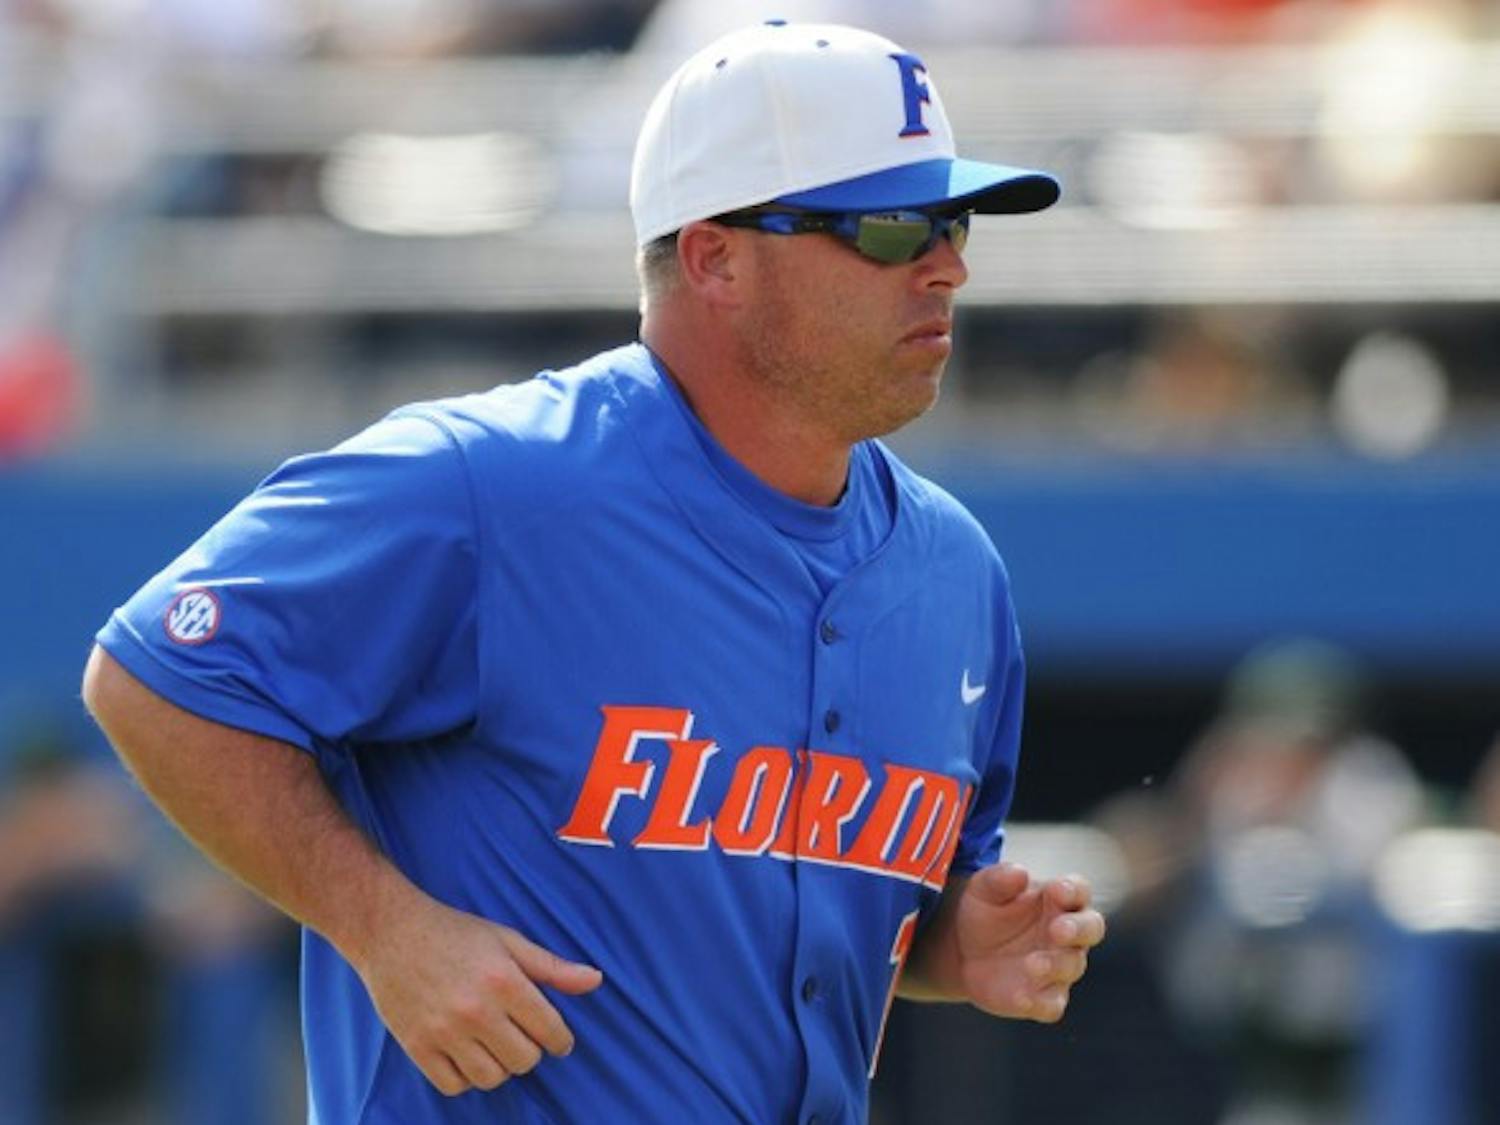 Florida coach Kevin O’Sullivan lost five pitchers this offseason to the MLB and is now looking to sophomores Daniel Gibson, Jonathan Crawford and Keenan Kish to lead the Gators’ middle relief.